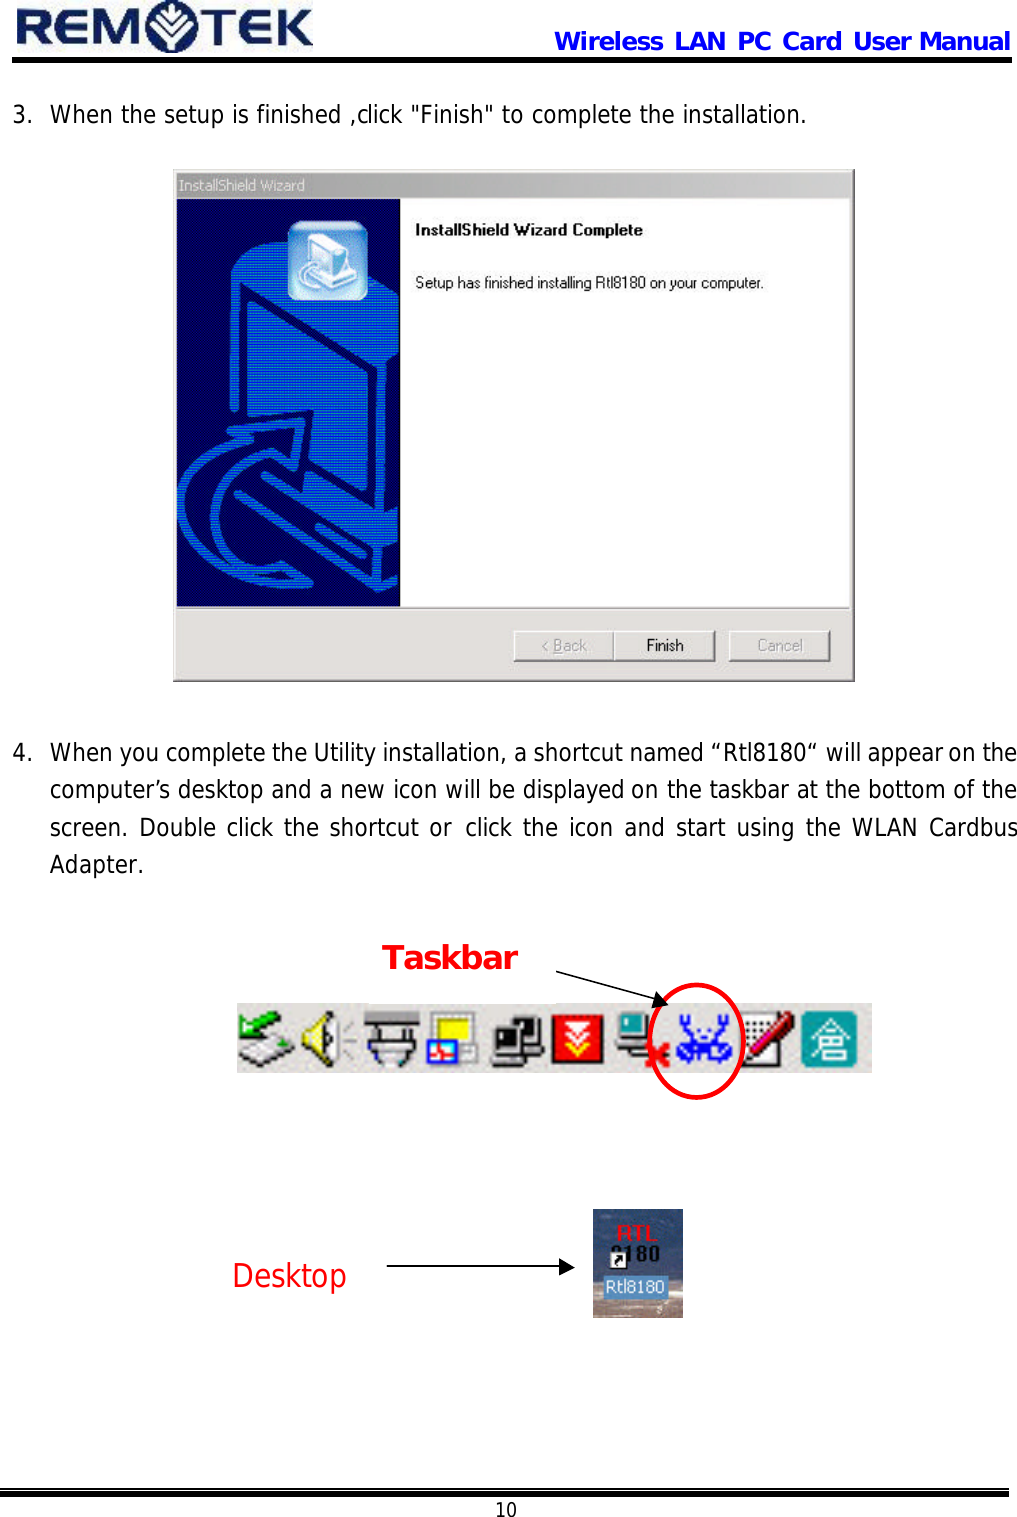                      Wireless LAN PC Card User Manual            10  3. When the setup is finished ,click &quot;Finish&quot; to complete the installation.                 4. When you complete the Utility installation, a shortcut named “Rtl8180“ will appear on the computer’s desktop and a new icon will be displayed on the taskbar at the bottom of the screen. Double click the shortcut or click the icon and start using the WLAN Cardbus Adapter.                 Desktop Taskbar 